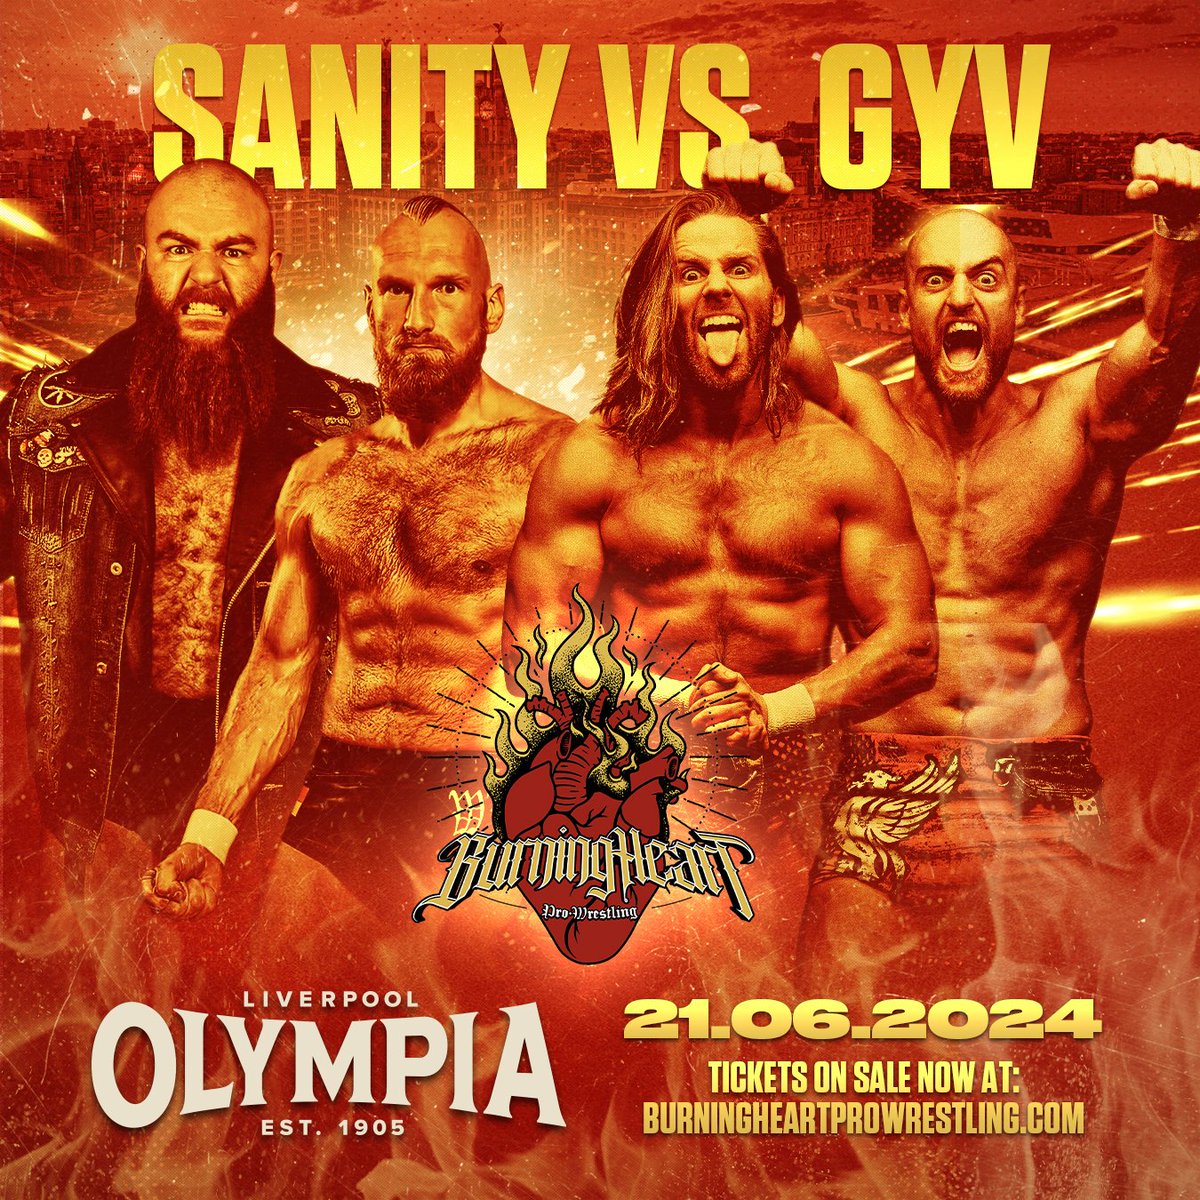 BREAKING! Huge tag team contest signed for Liverpool Olympia June 21st! Sanity vs. GYV! 2 teams who have had incredible success all around the world collide for the FIRST TIME EVER in Liverpool! Who do you have your money on? Link to tickets in our bio 🎟